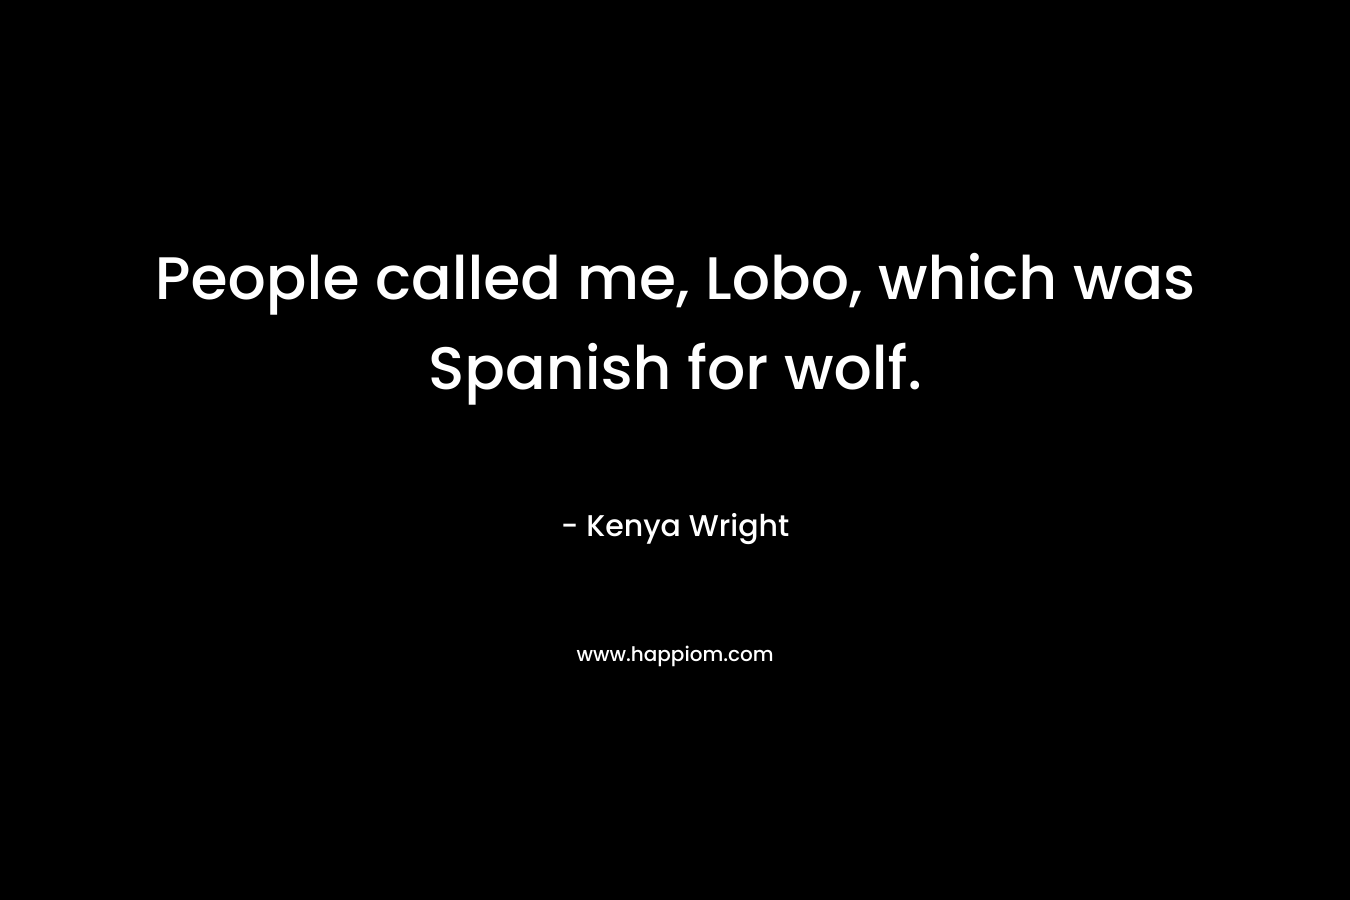 People called me, Lobo, which was Spanish for wolf.